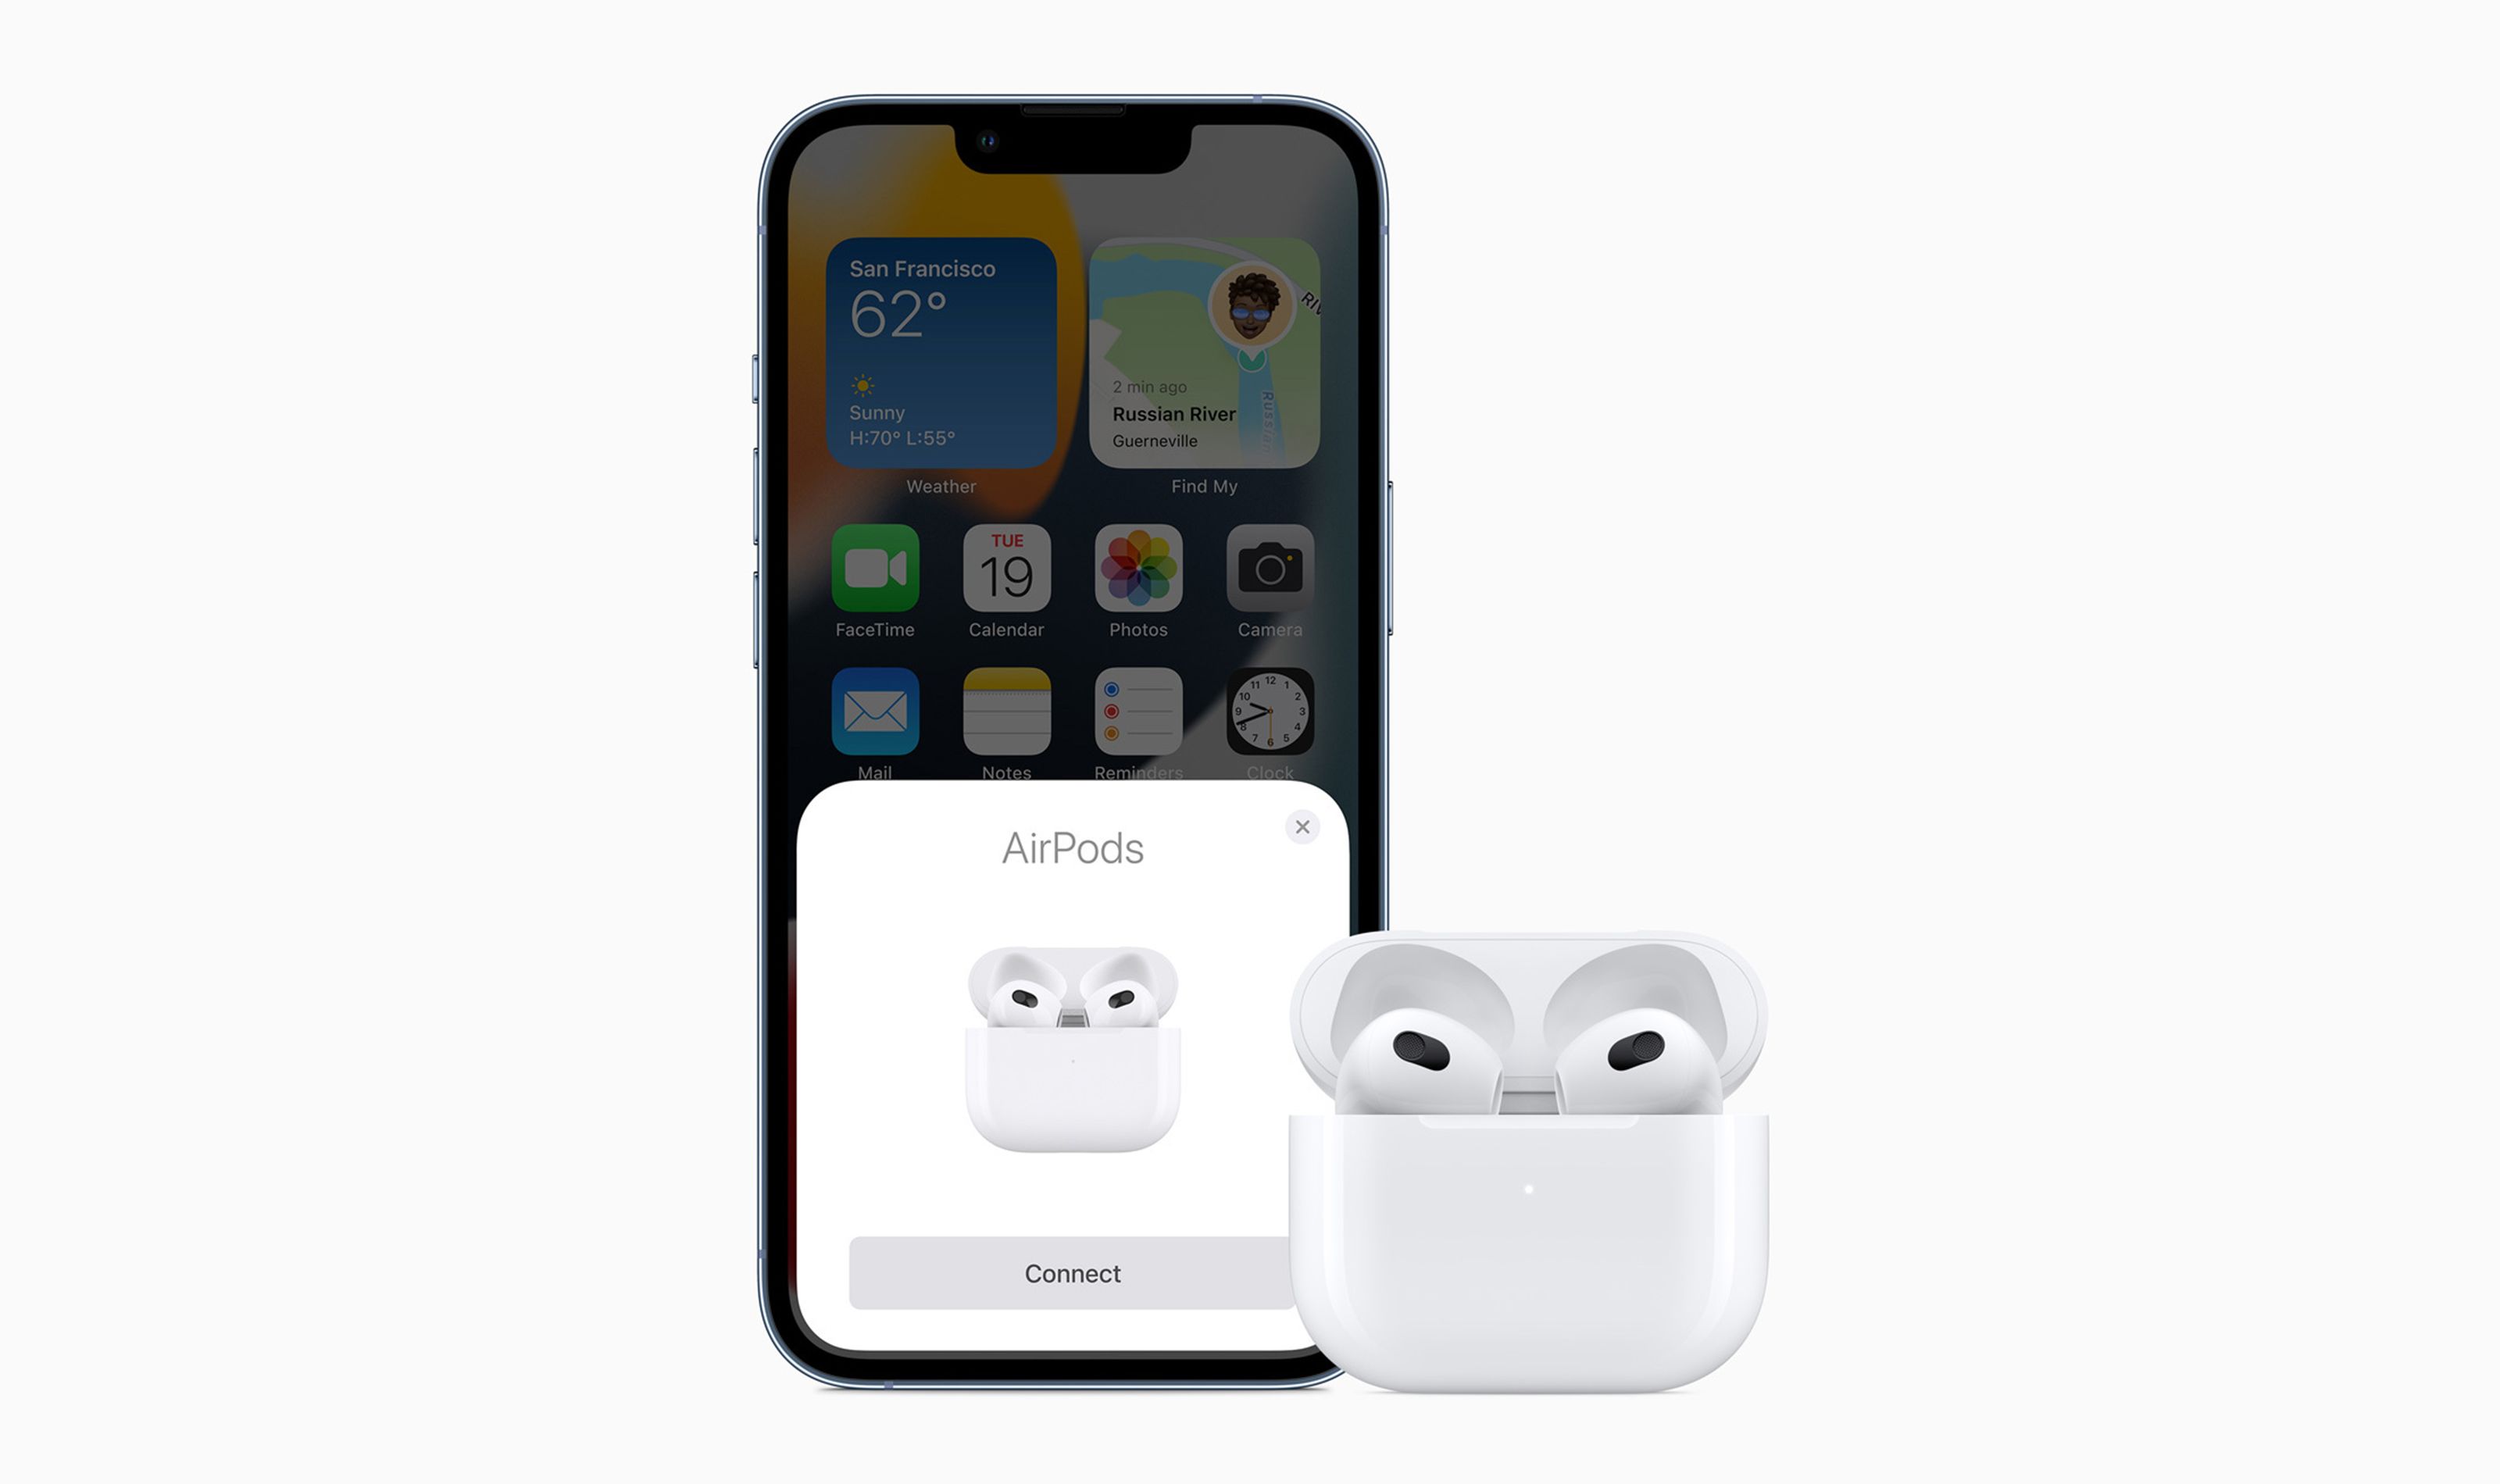 Apple AirPods Pro 2nd Gen: 6 tips and tricks to get the most out of Apple's  newest wireless earbuds